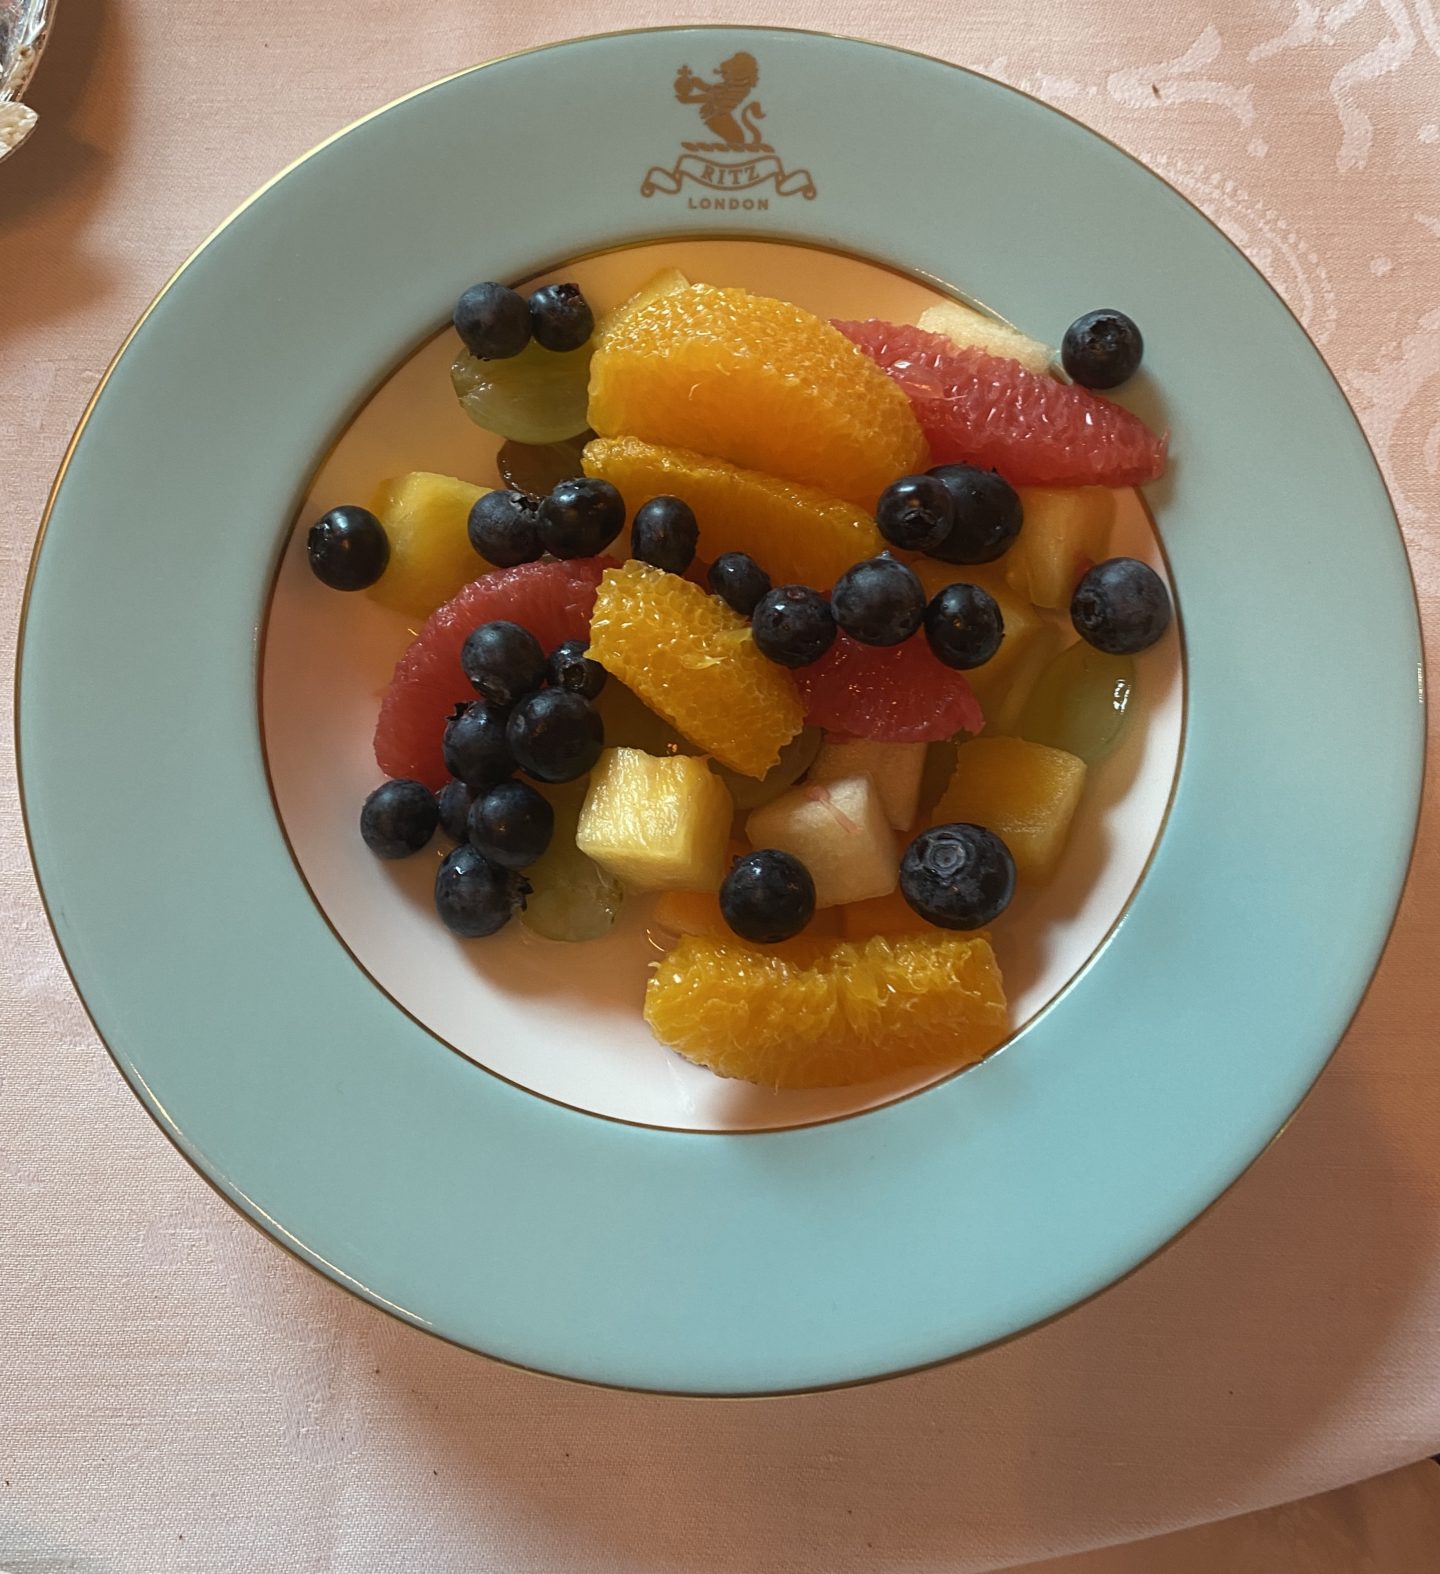 Fruit salad Breakfast in the dinning room at the ritz hotel London 